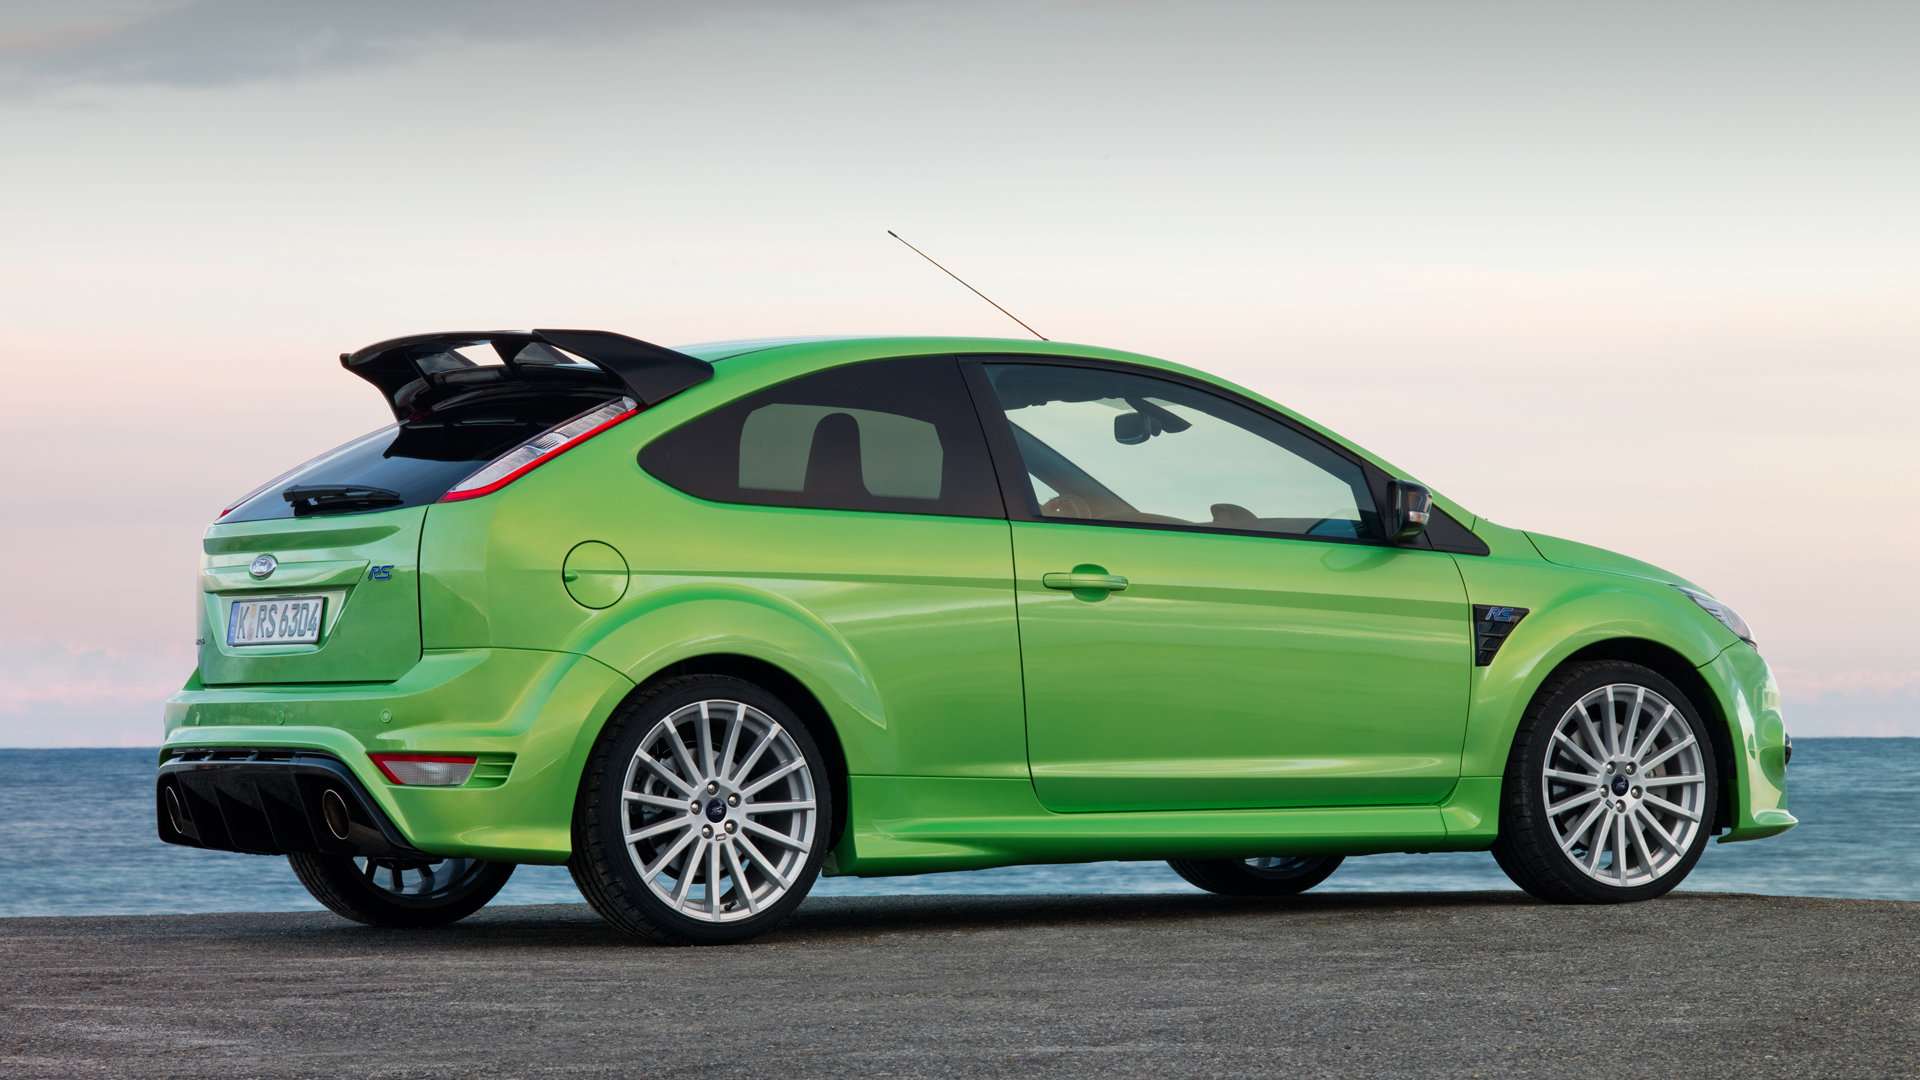 Ford Focus Rs HD Wallpaper Version Rs500